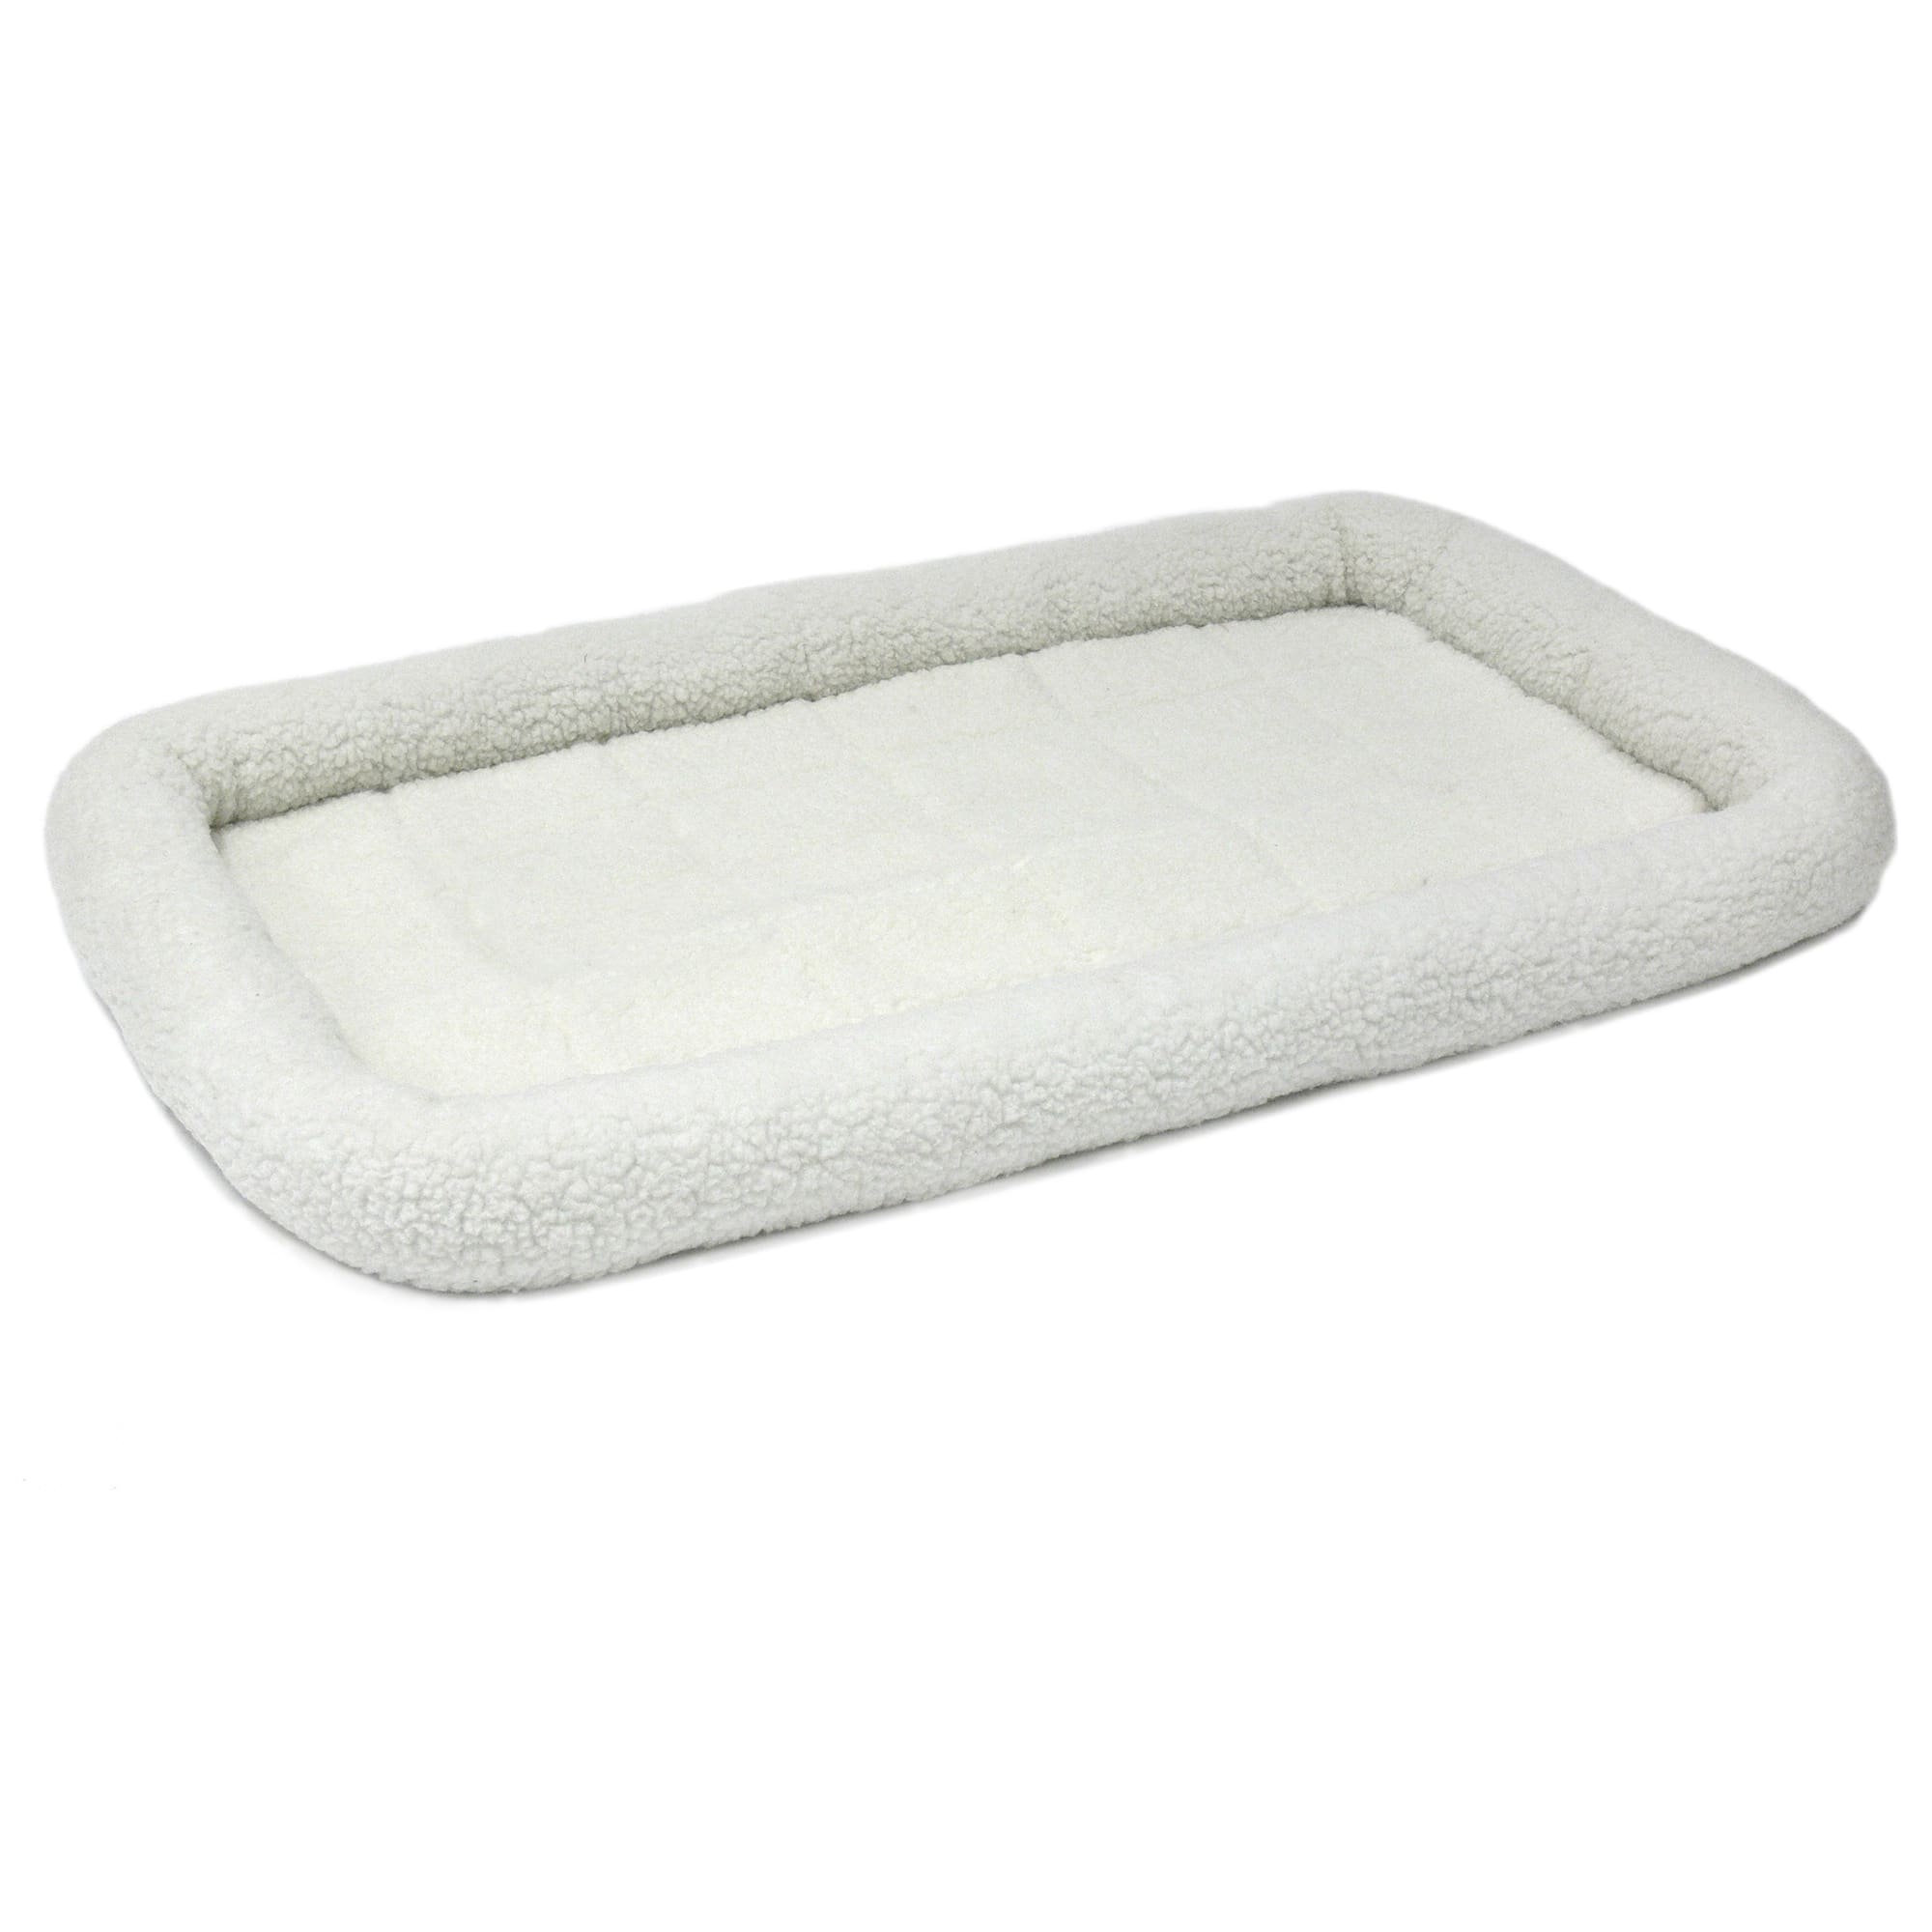 Photos - Dog Bed / Basket Midwest Quiet Time Bolster White Dog Bed, 48" L X 30" W, XX-Large, 